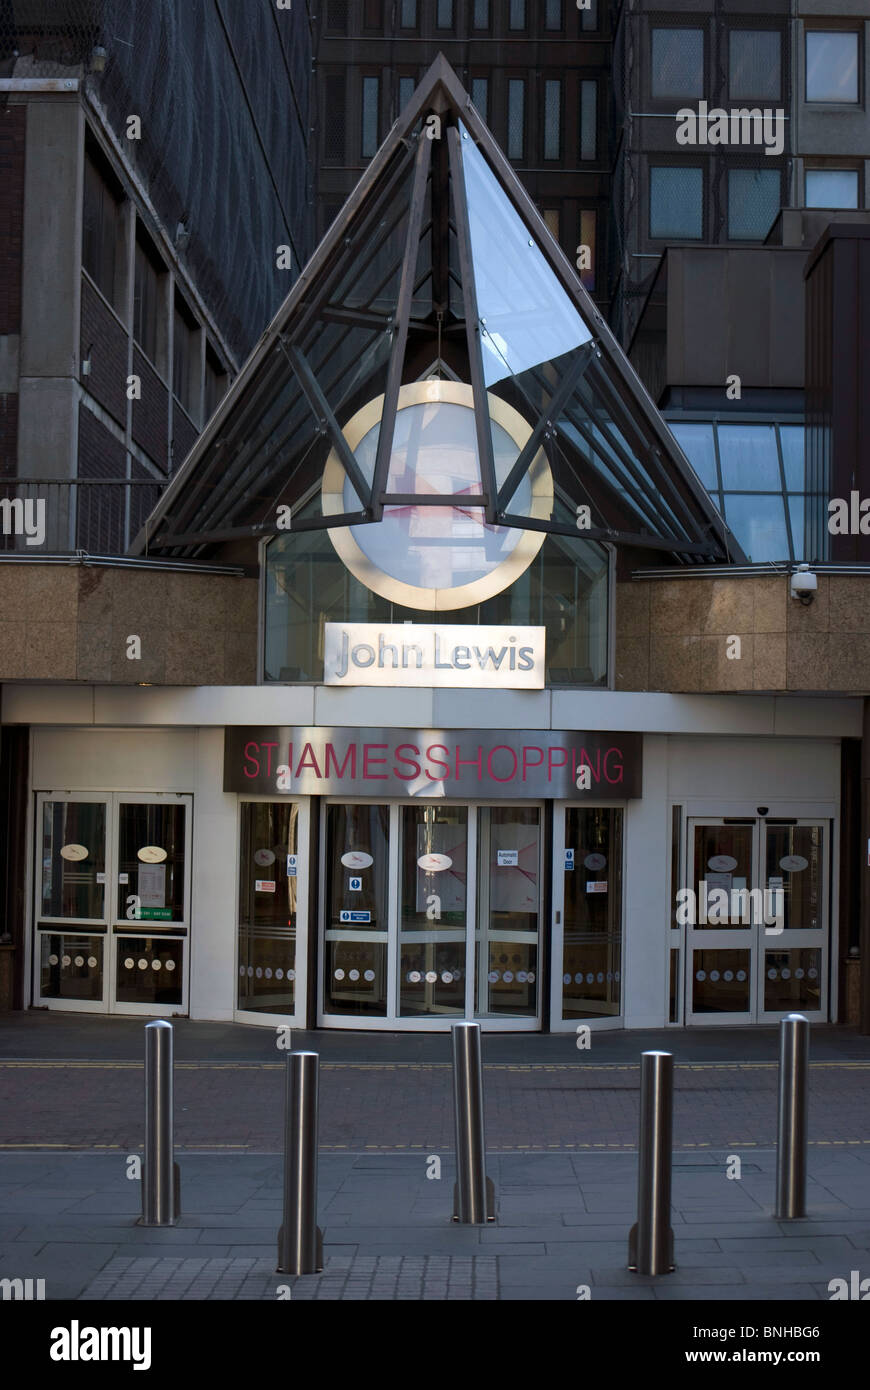 The entrance to the St James Shopping Centre (mall) in Edinburgh, Scotland. Stock Photo